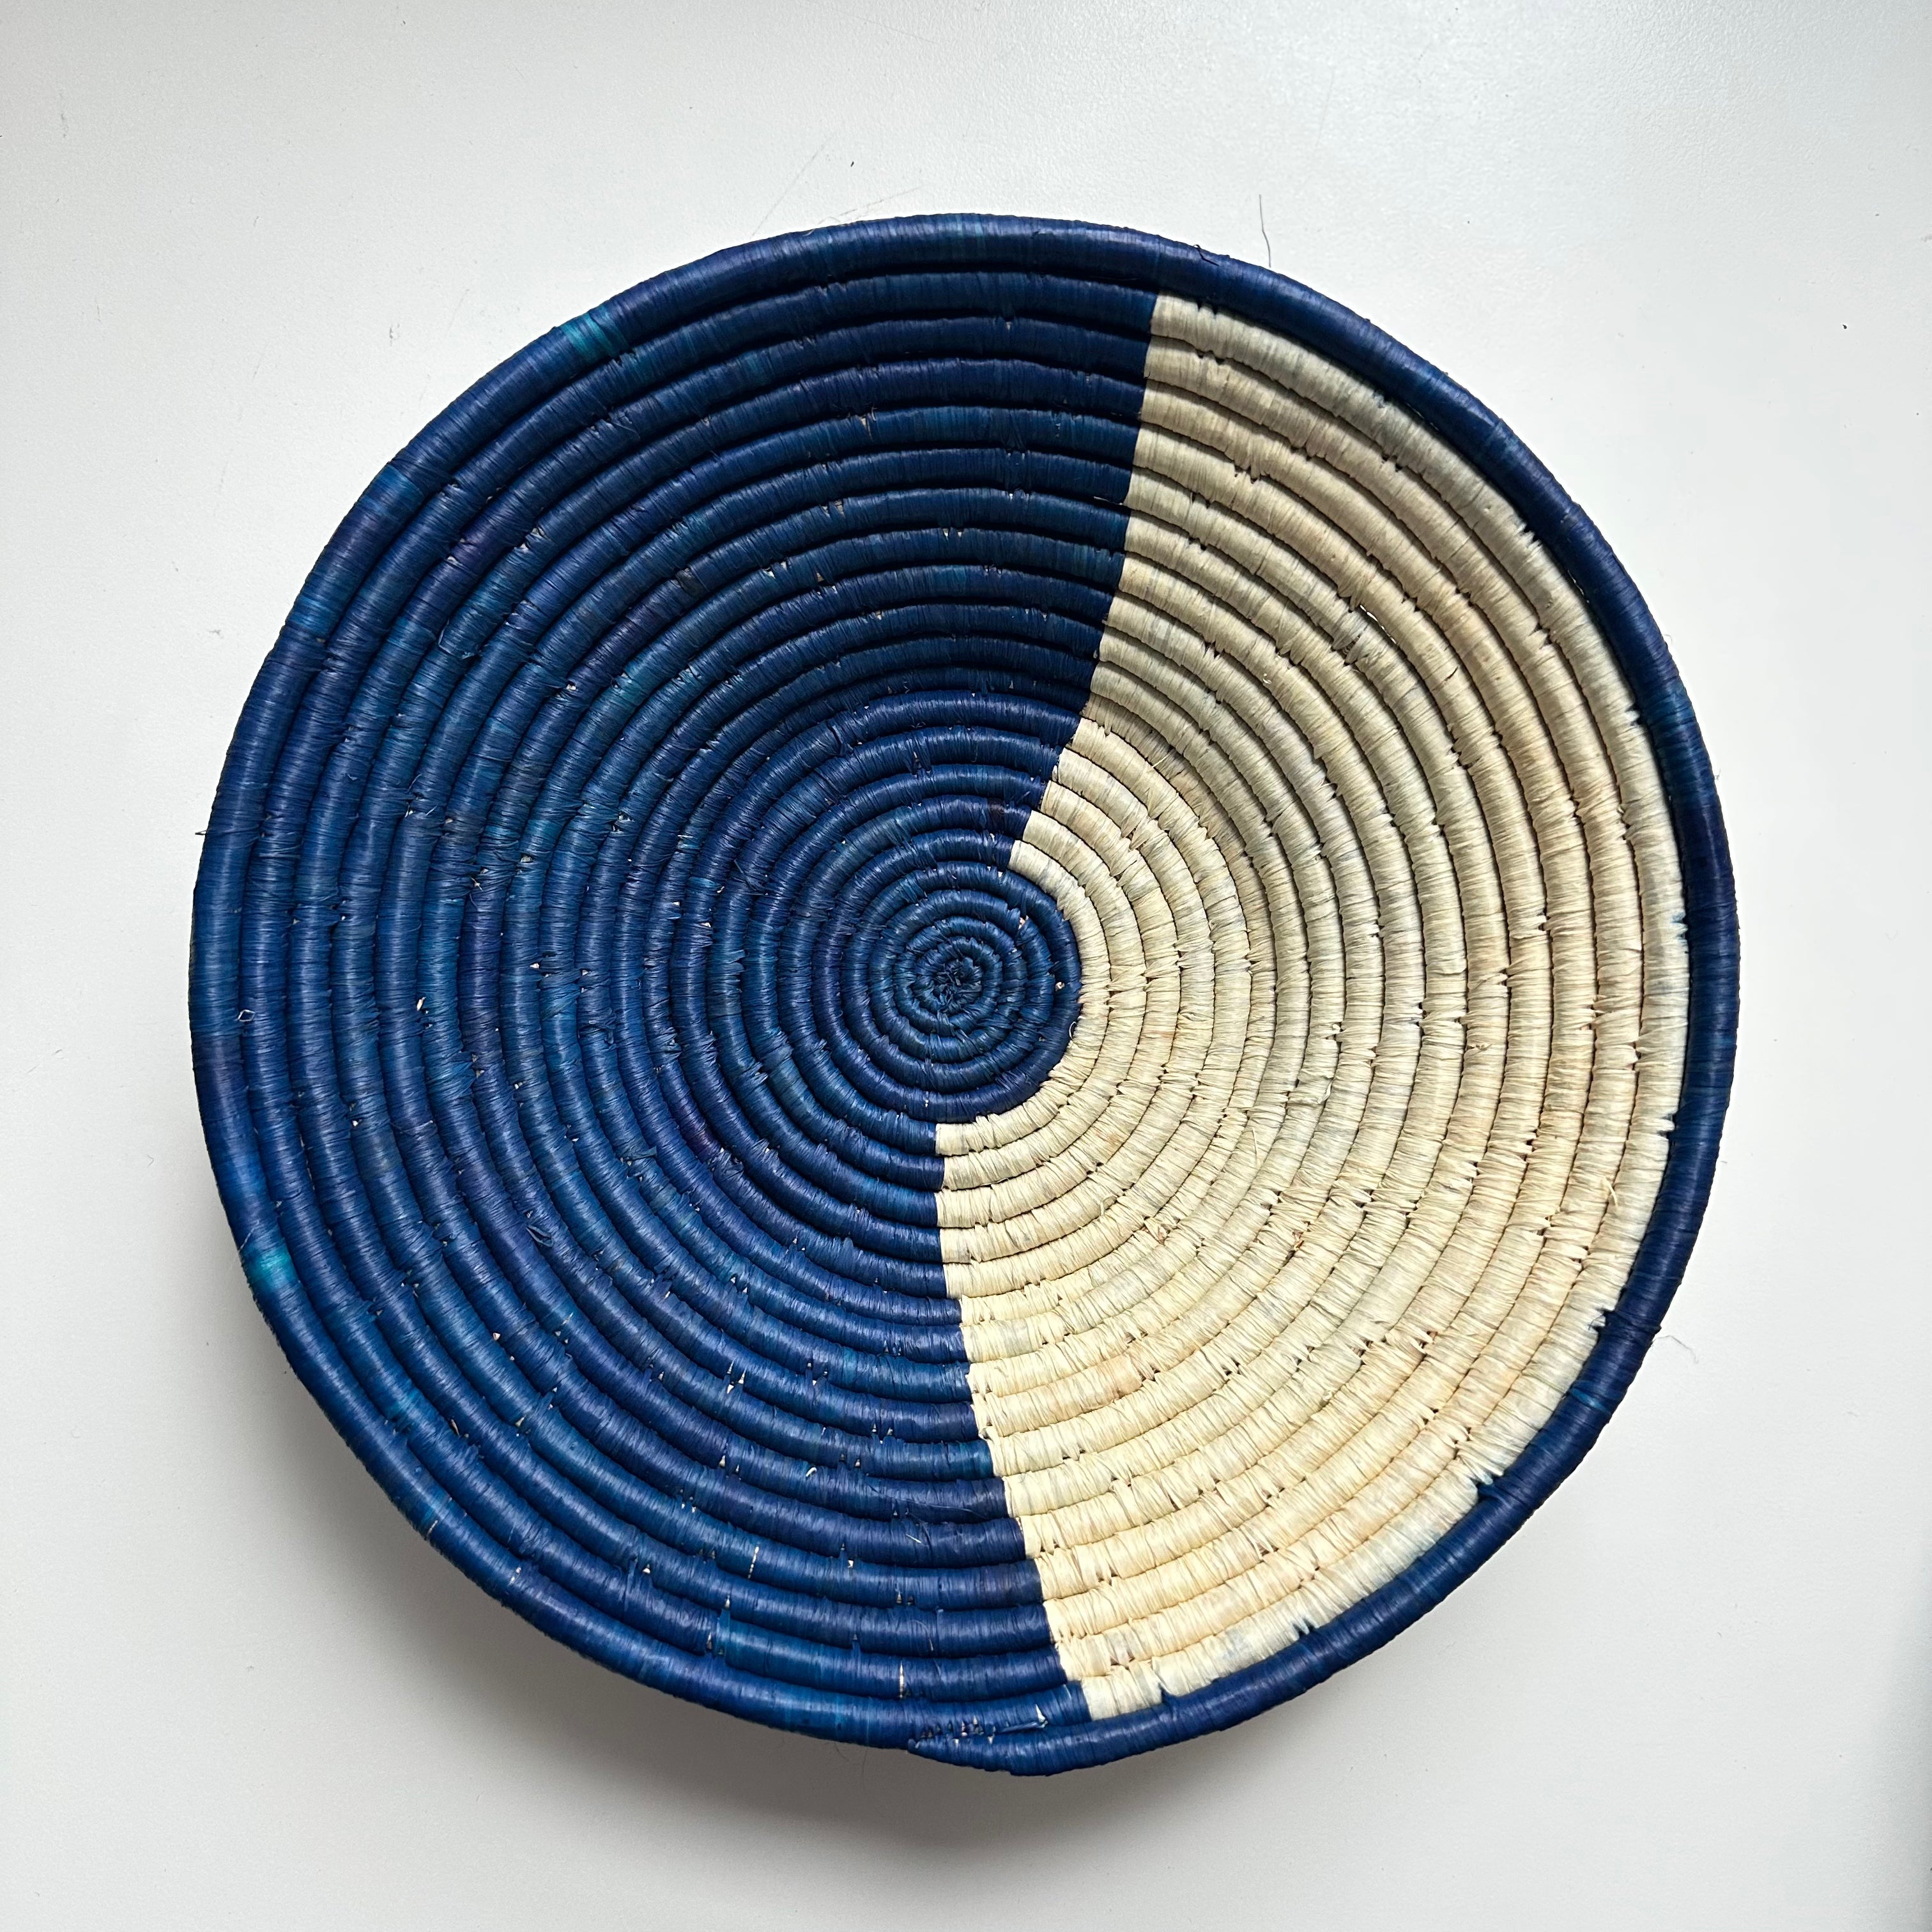 The display of blue and natural color handwoven bowl